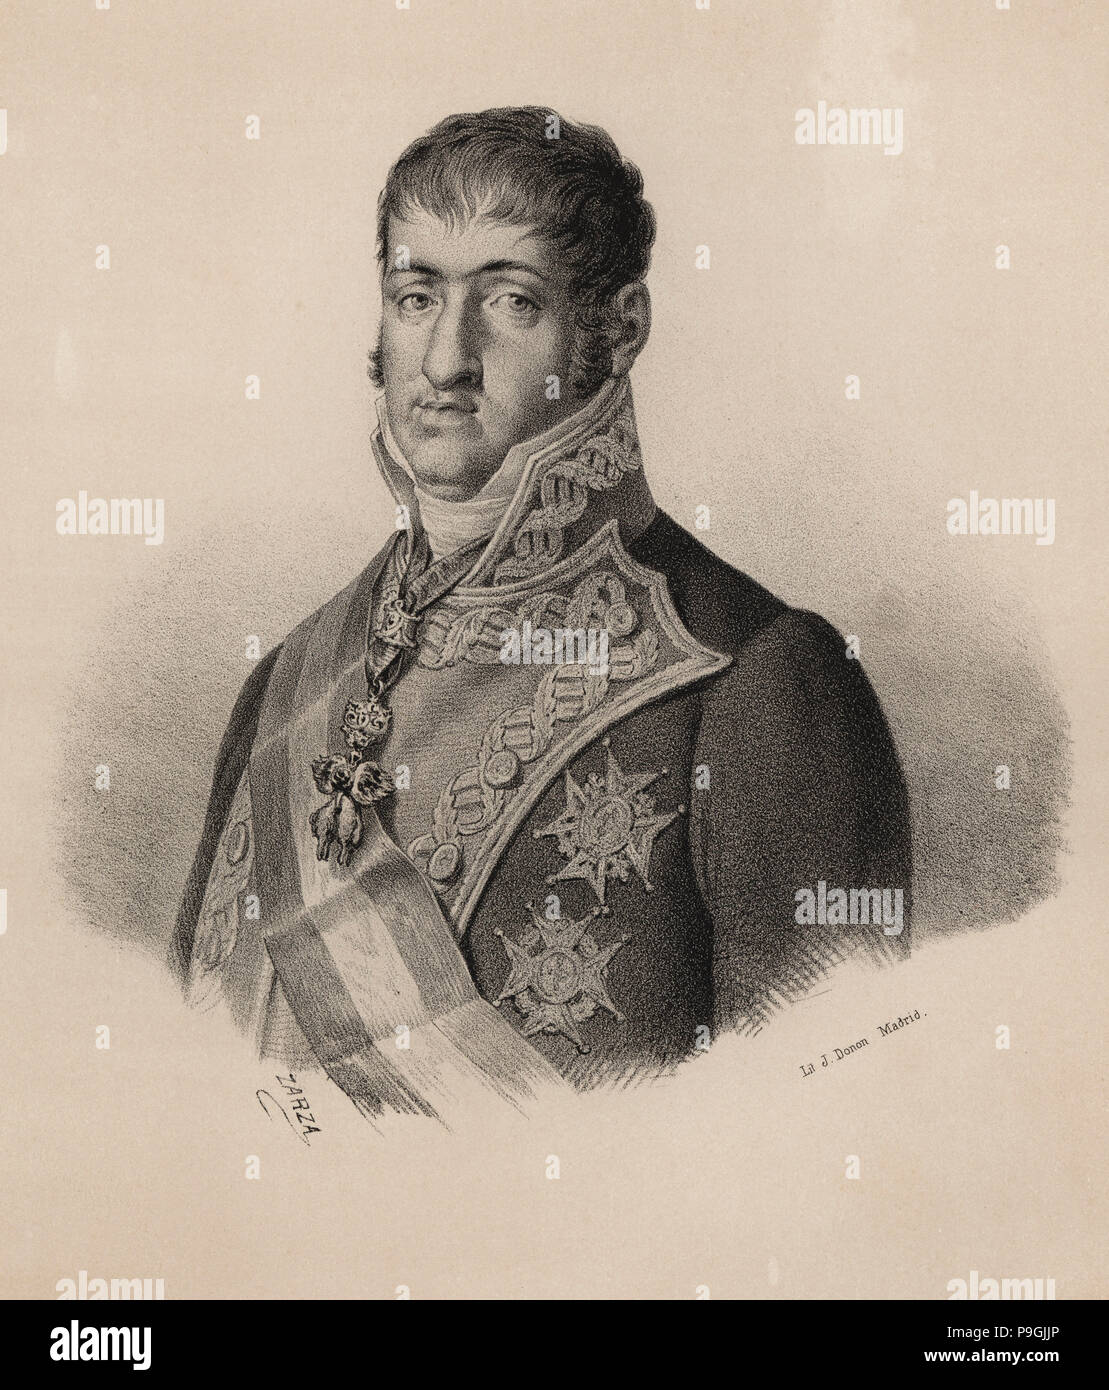 Ferdinand VII (1784-1833), third son of Charles III. King of Spain from 1808-1833, known by the n… Stock Photo